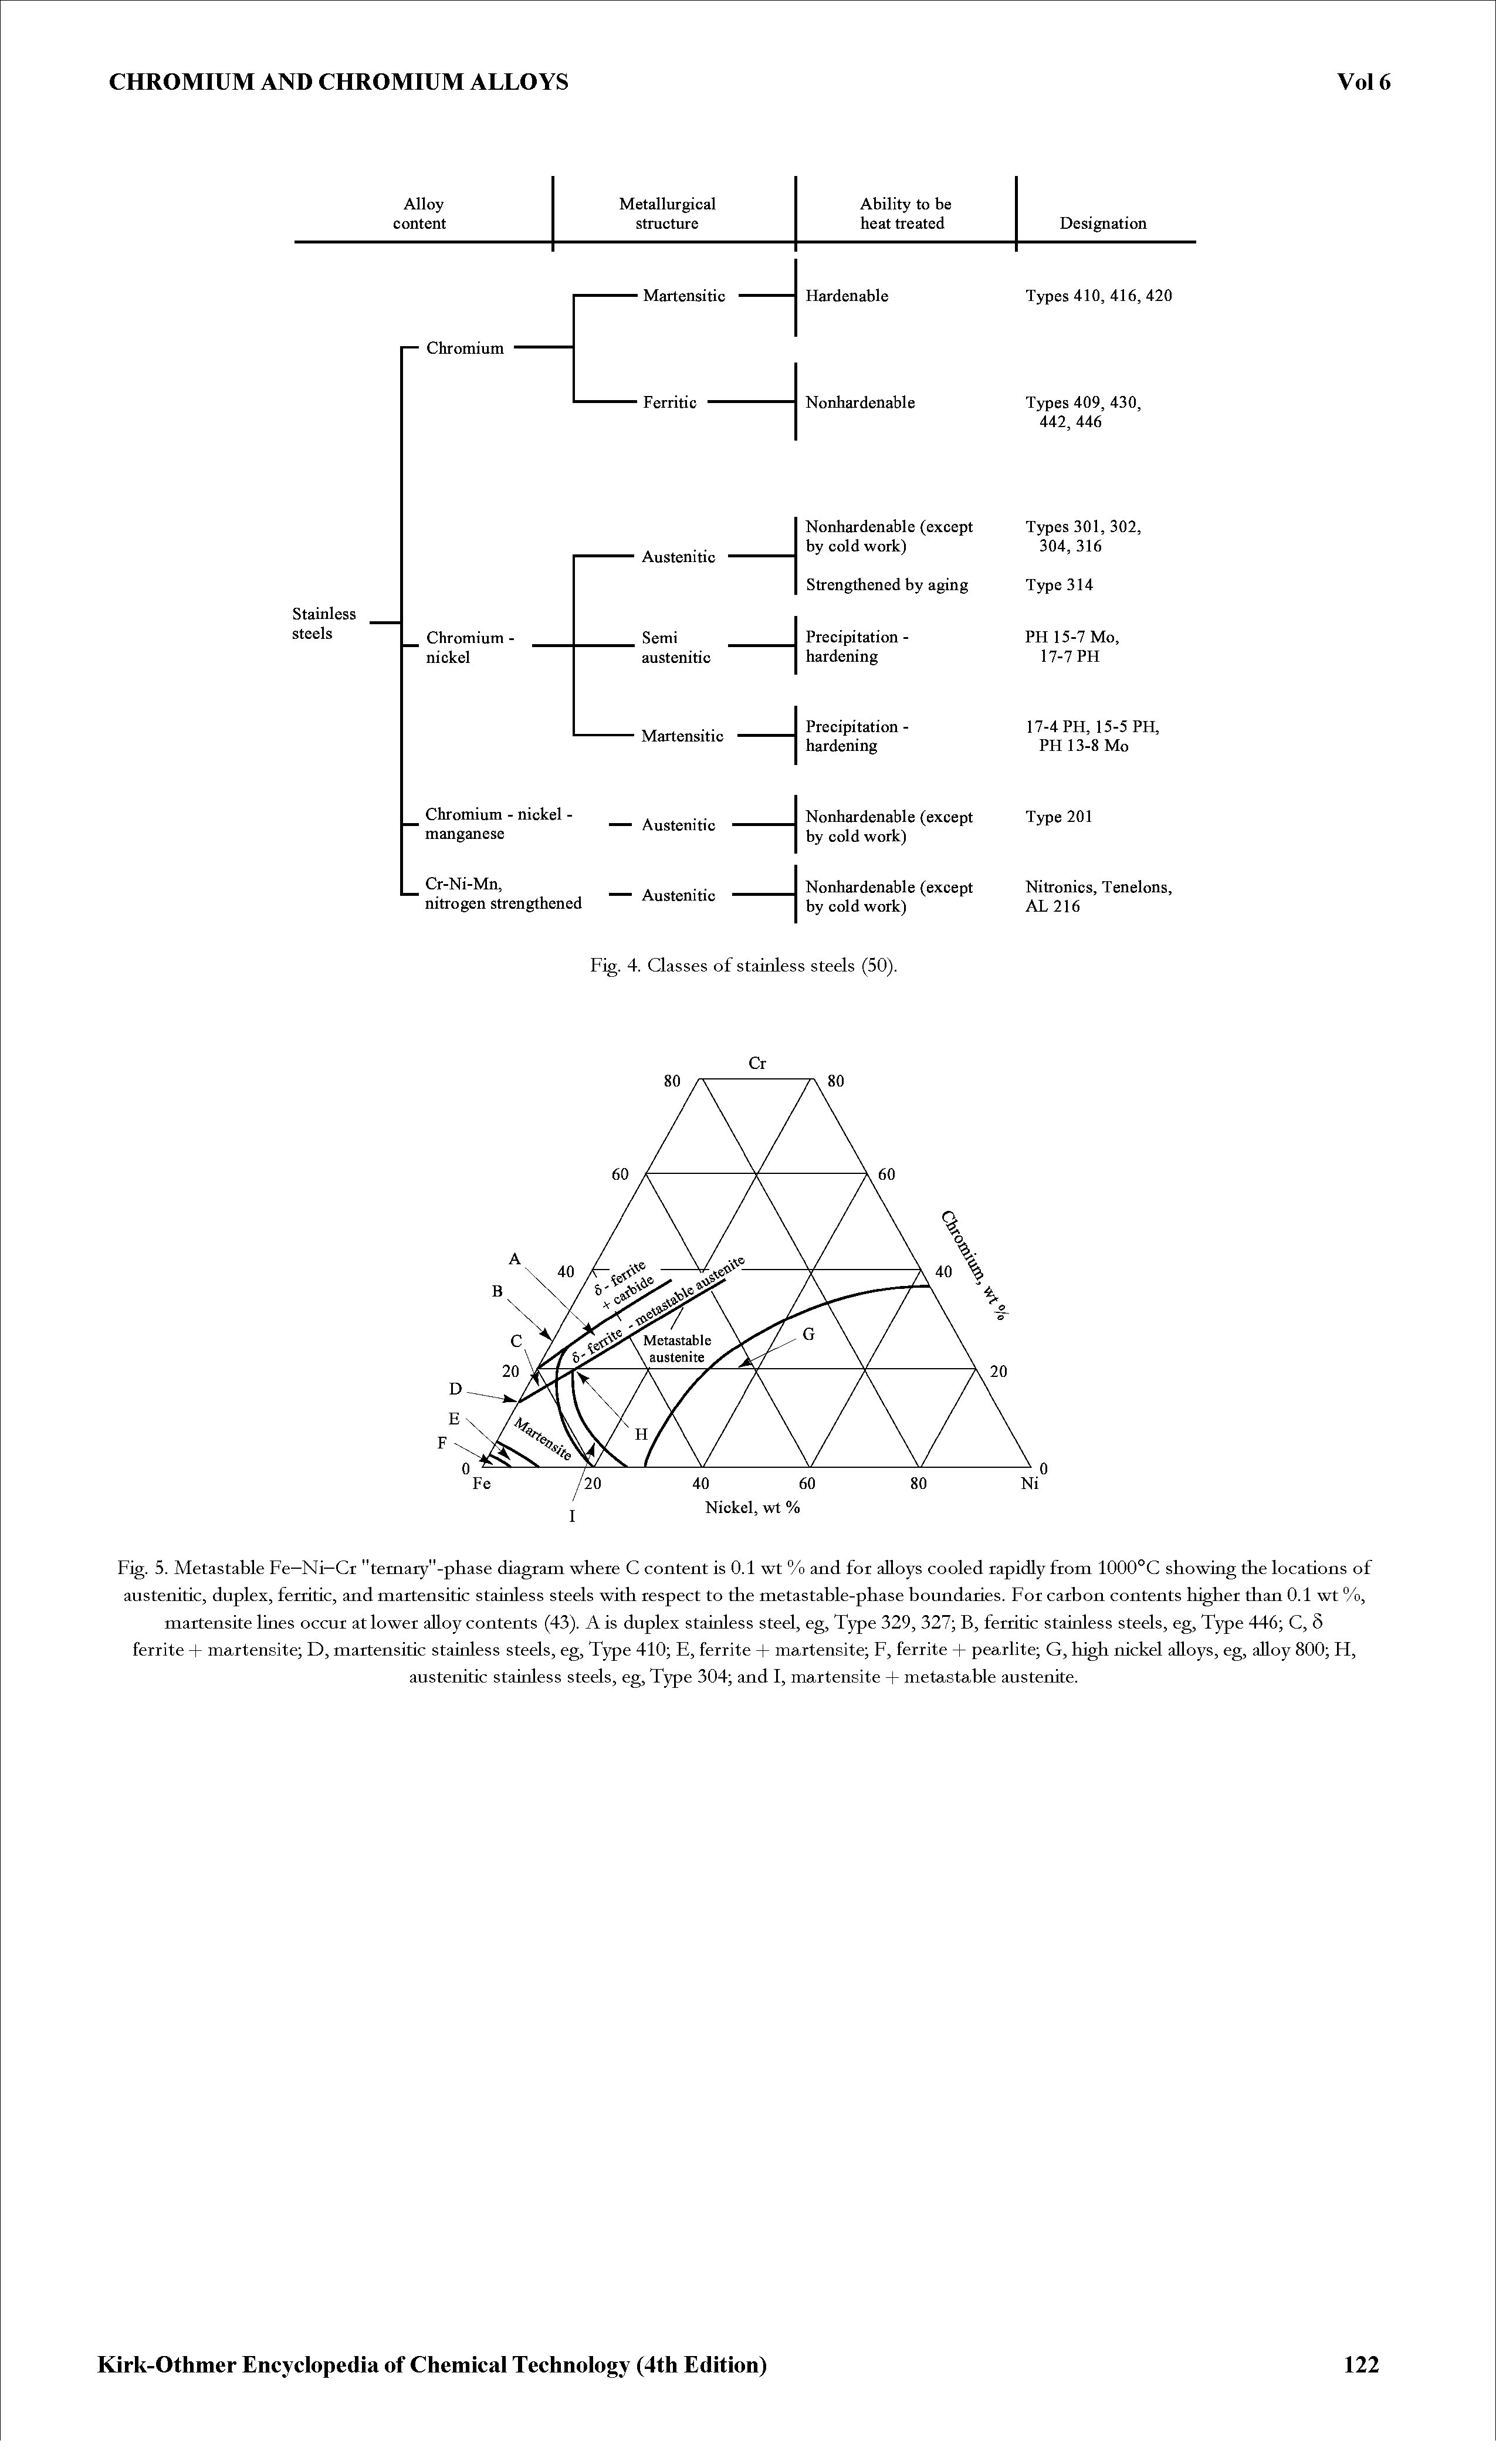 Fig. 5. Metastable Fe—Ni—Cr "temary"-pliase diagram where C content is 0.1 wt % and for alloys cooled rapidly from 1000°C showing the locations of austenitic, duplex, ferritic, and martensitic stainless steels with respect to the metastable-phase boundaries. For carbon contents higher than 0.1 wt %, martensite lines occur at lower ahoy contents (43). A is duplex stainless steel, eg. Type 329, 327 B, ferritic stainless steels, eg. Type 446 C, 5 ferrite + martensite D, martensitic stainless steels, eg. Type 410 E, ferrite + martensite F, ferrite + pearlite G, high nickel ahoys, eg, ahoy 800 H,...